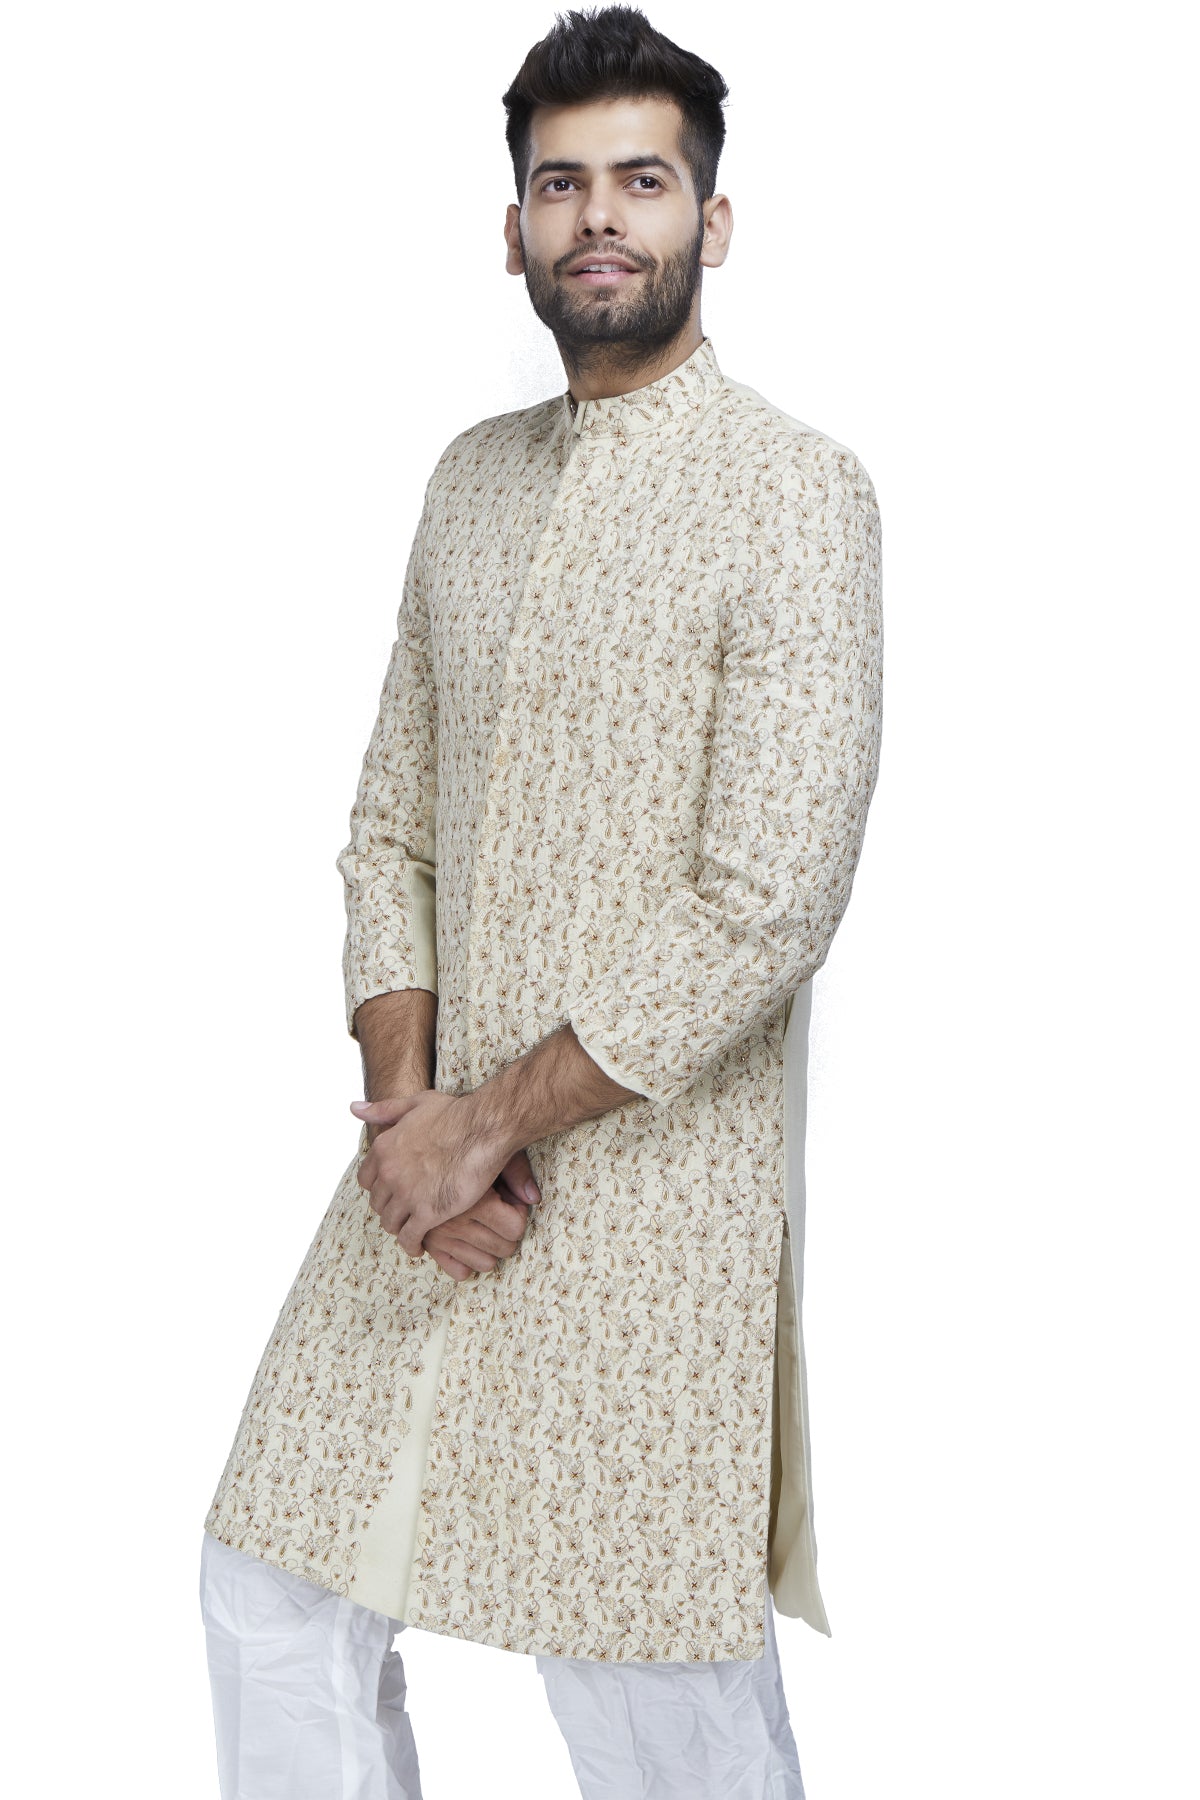 Weaving stories with sentiments - this ivory cotton sherwani transcends time with its white, gold and maroon threadwork.